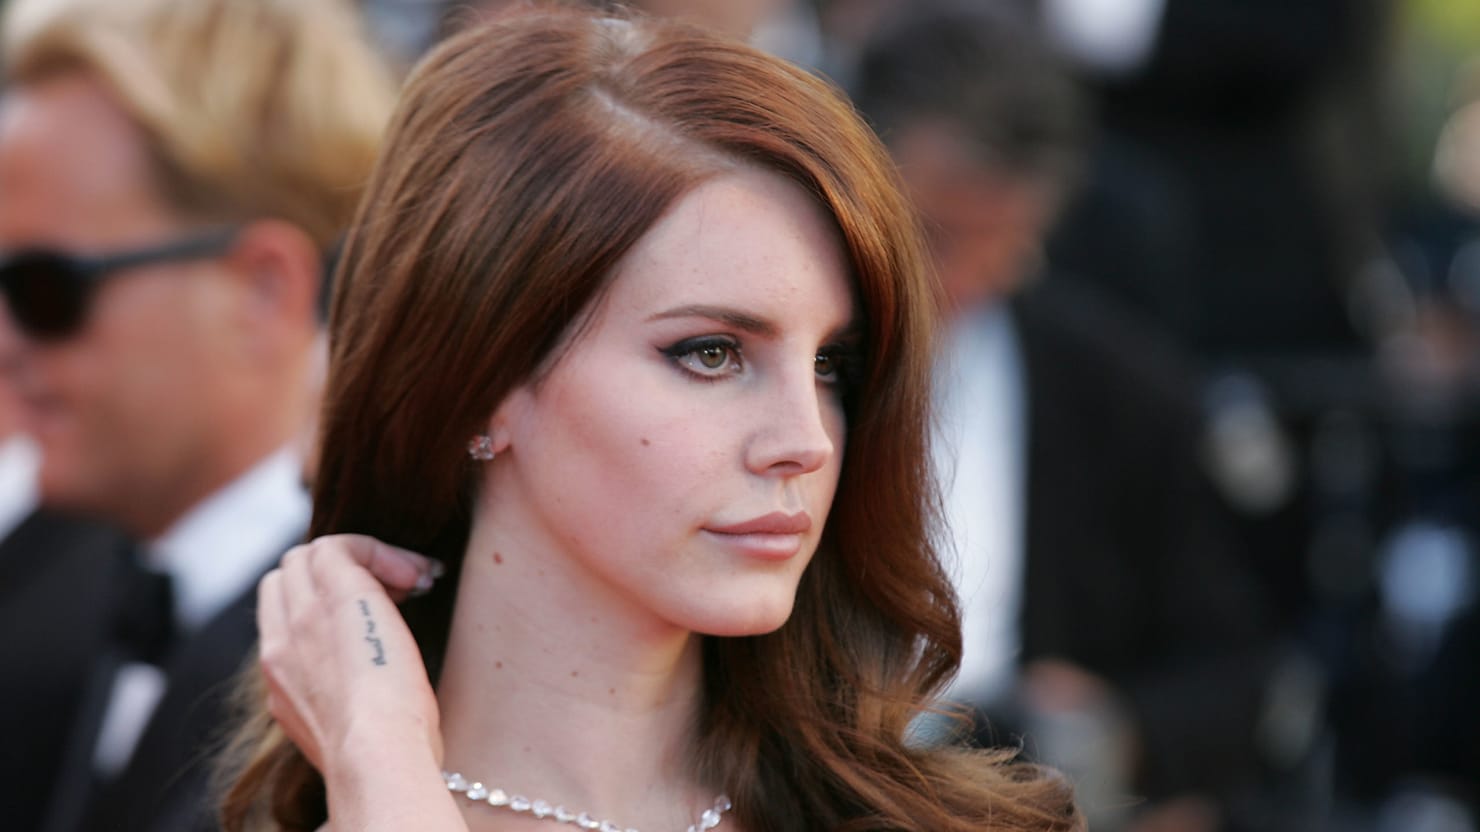 Lana Del Rey's Silly Death Wish and the Perils of Pop Artifice